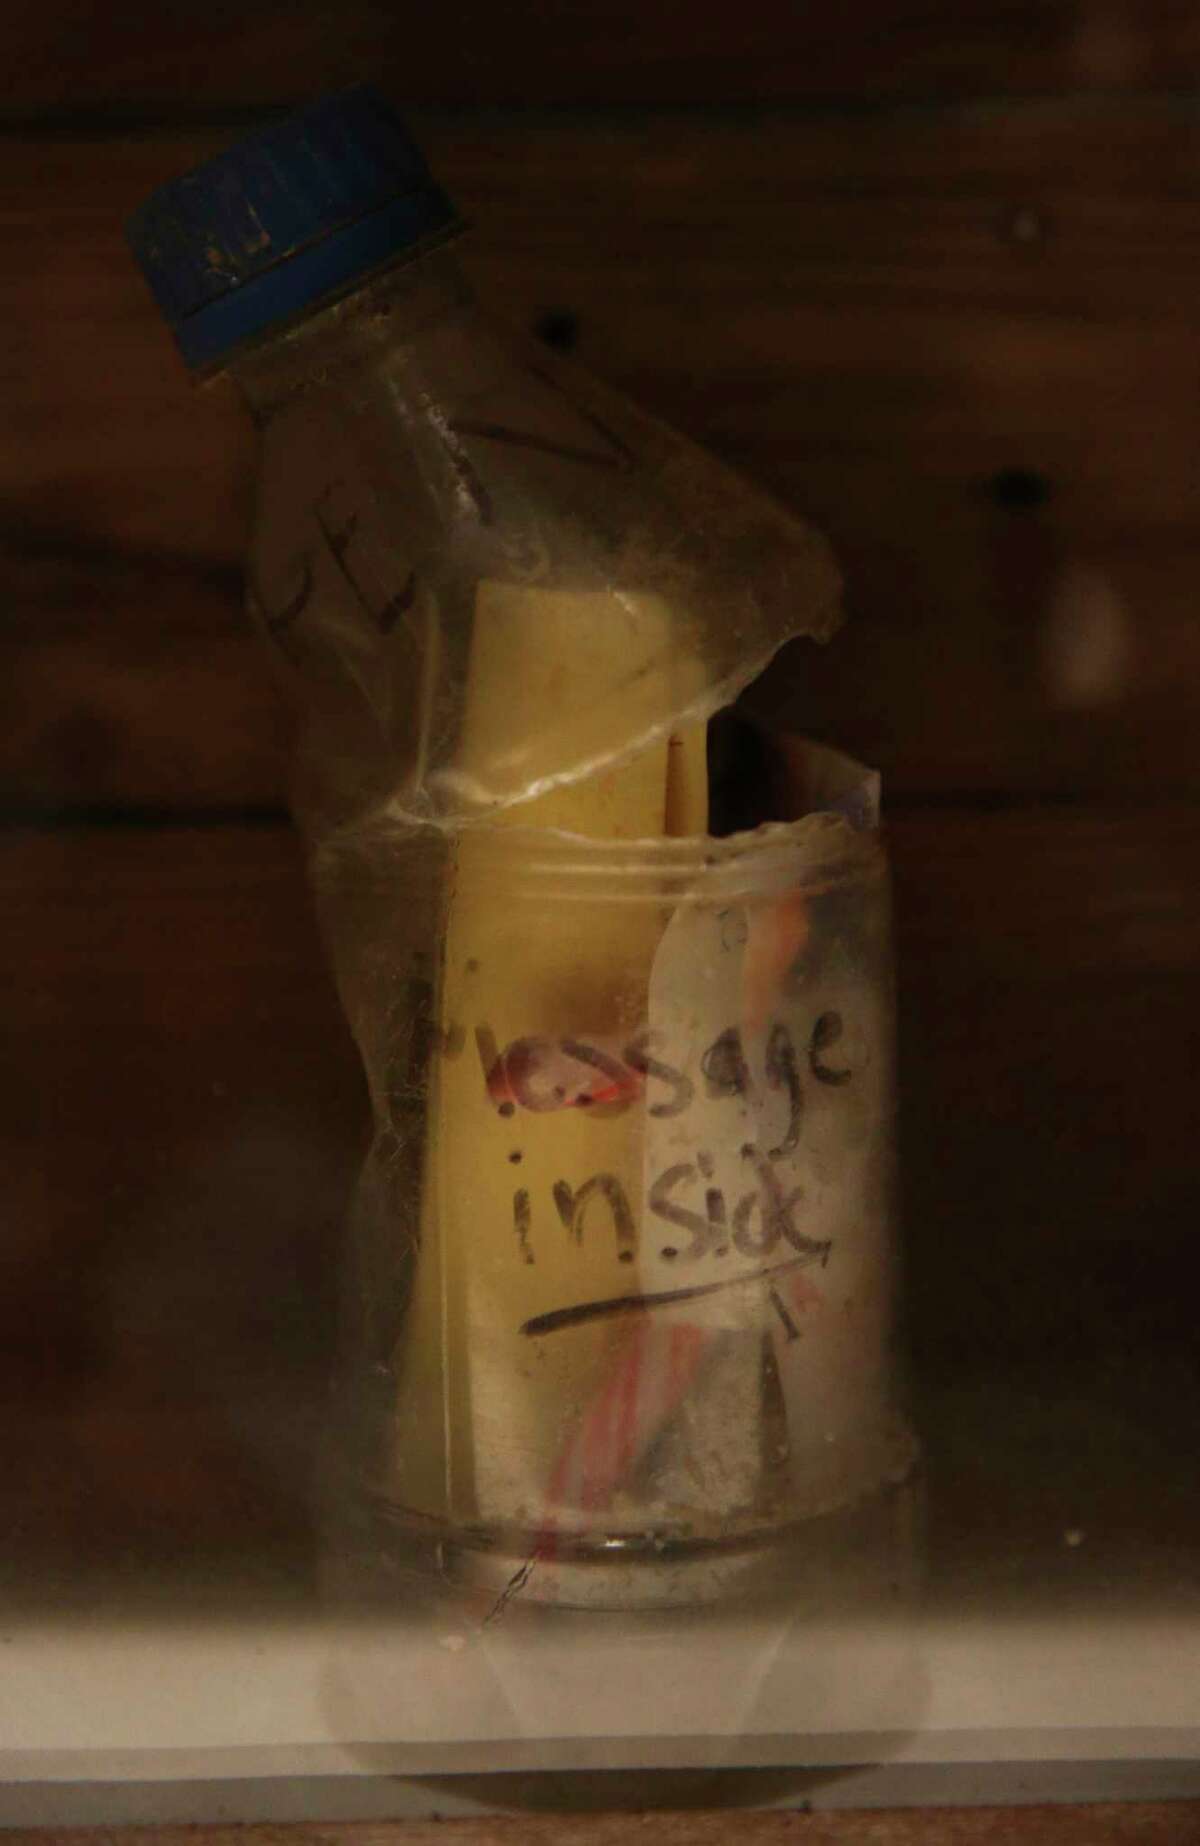 The bottle that asks the founder to open it and read the message in side is a part of The Message in at Bottle exhibition at the Houston Museum of Natural Science on Wednesday, Feb. 14, 2018, in Houston. Chad Pregracke, the Living Lands & Waters crew and volunteers found bottles that contain messages since 1998 while cleaning up Mississippi River, Missouri River, Illinois River and Ohio River. ( Yi-Chin Lee / Houston Chronicle )